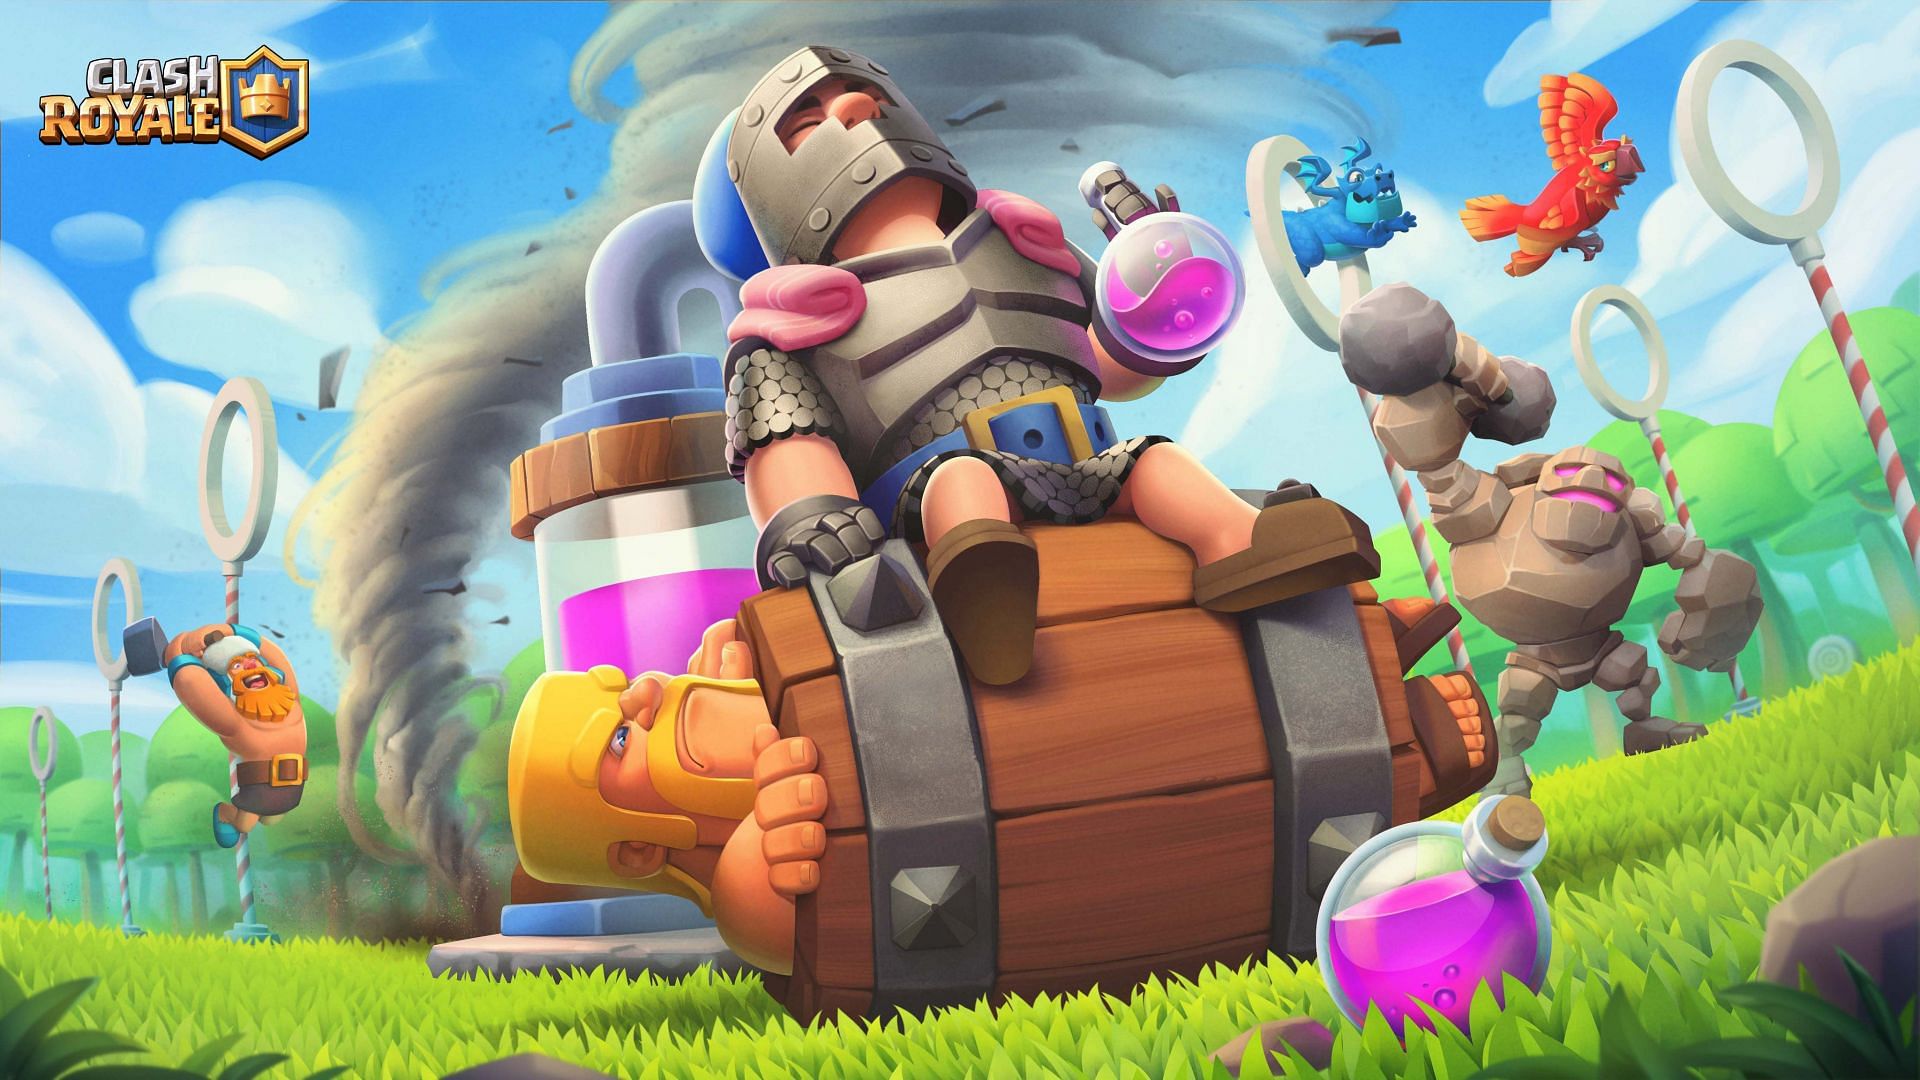 Tips to use cards with knockback effects strategically in Clash Royale